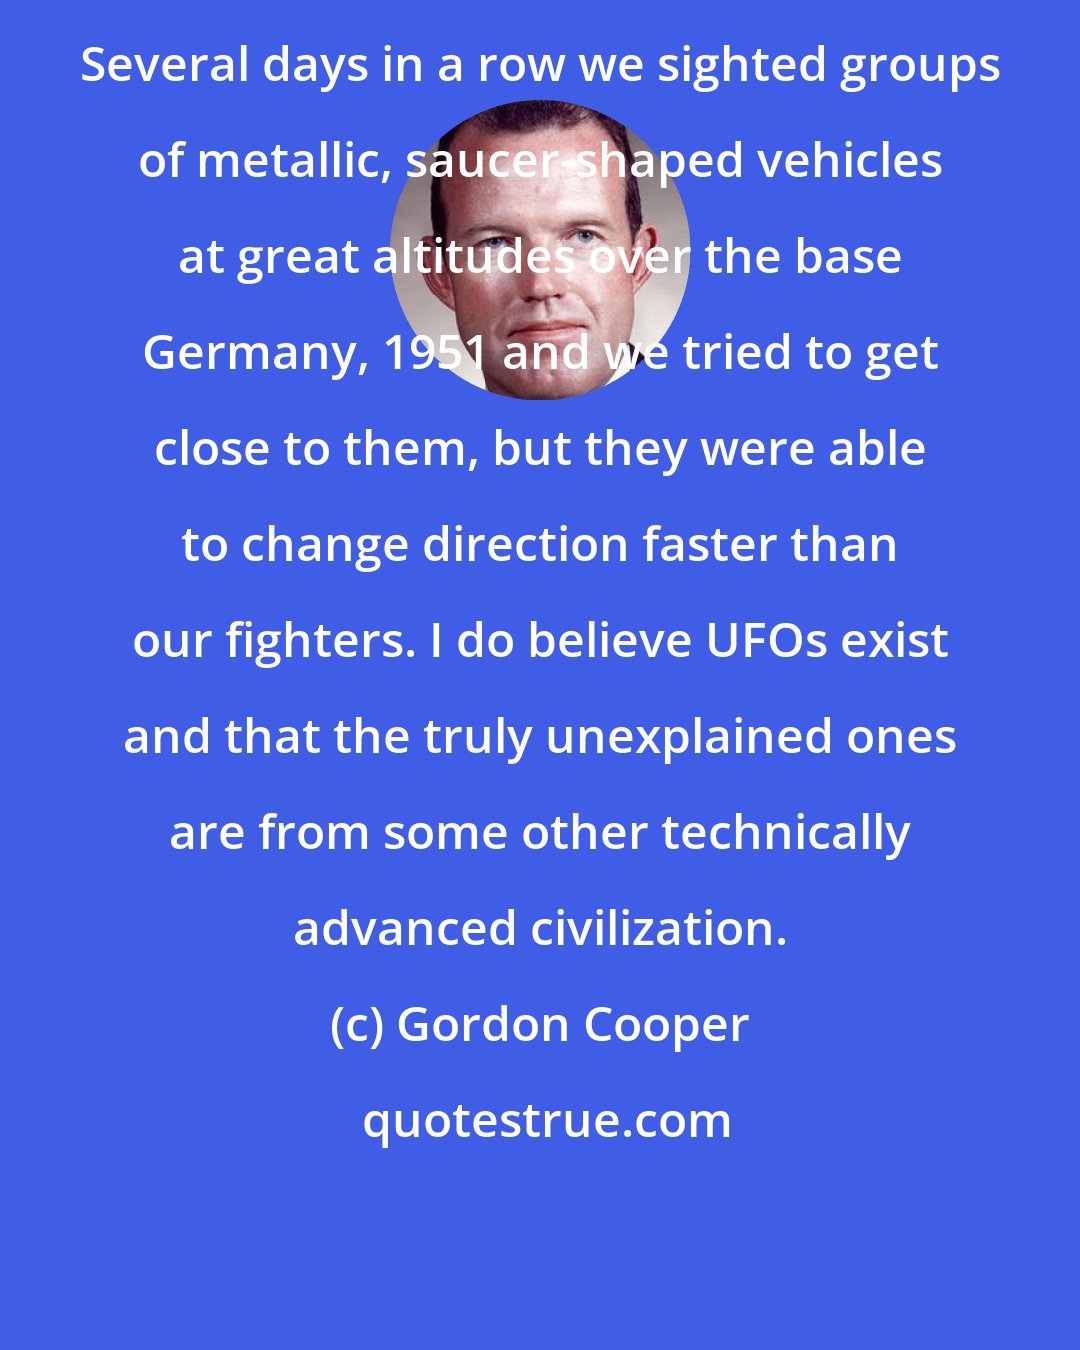 Gordon Cooper: Several days in a row we sighted groups of metallic, saucer-shaped vehicles at great altitudes over the base Germany, 1951 and we tried to get close to them, but they were able to change direction faster than our fighters. I do believe UFOs exist and that the truly unexplained ones are from some other technically advanced civilization.